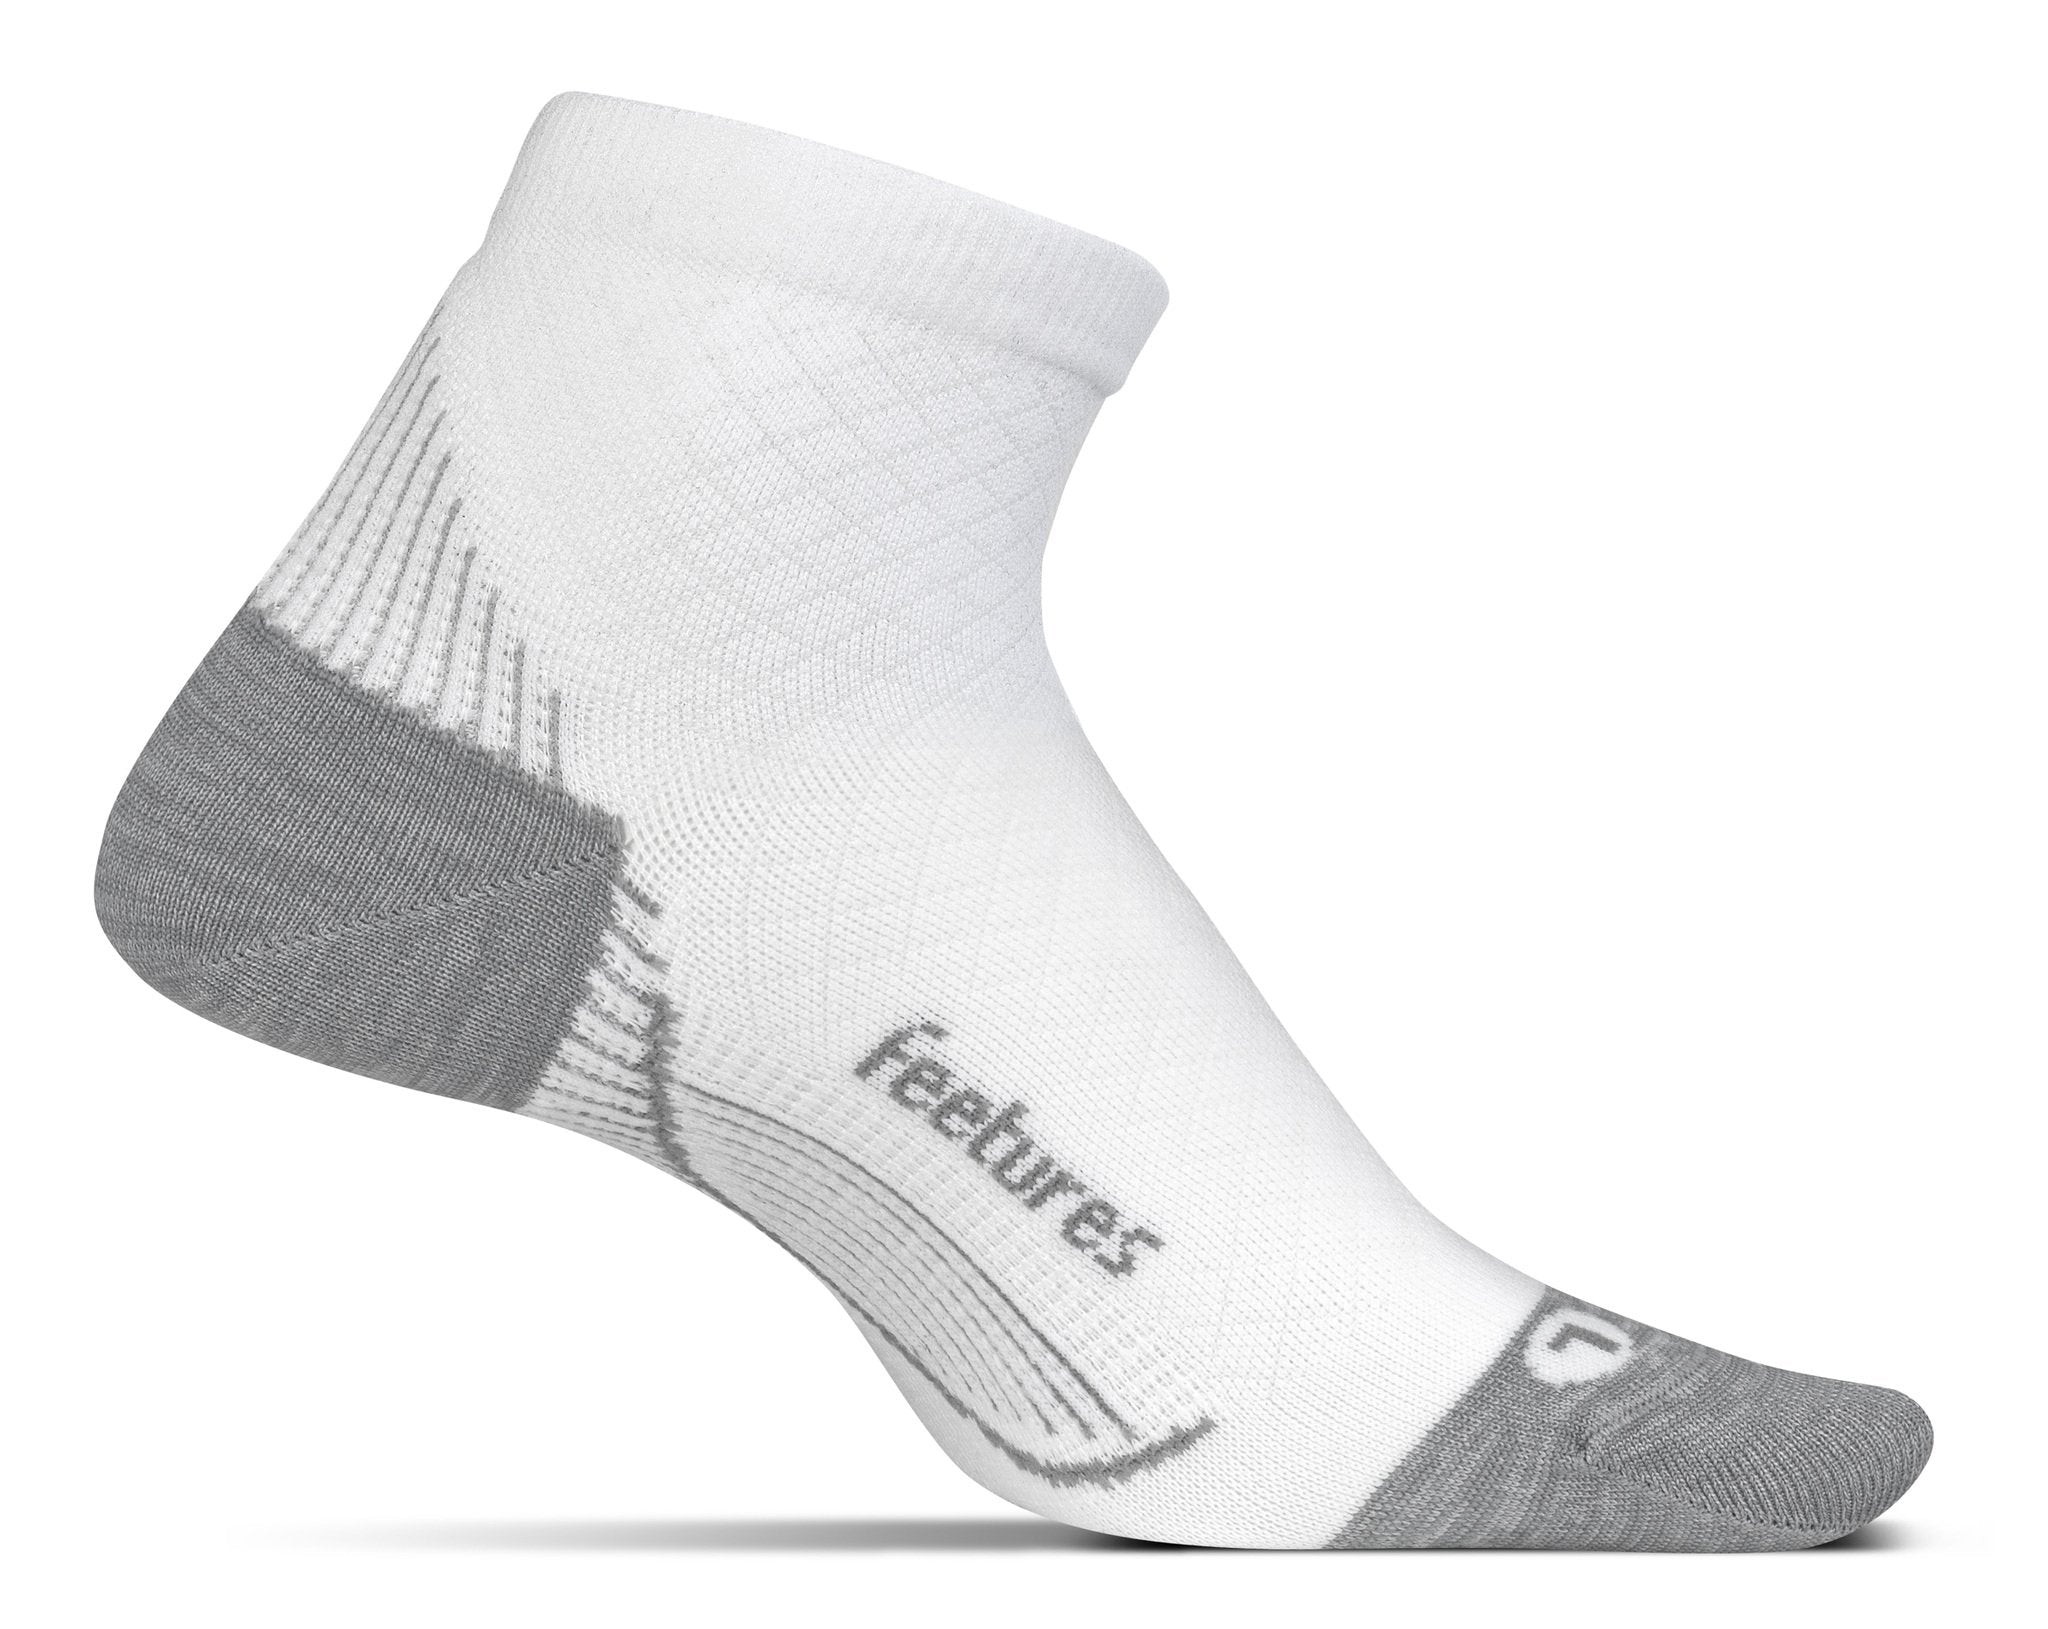 A medial view of the Feetures Plantar Fasciitis Quarter Sock (left foot) in the color white.